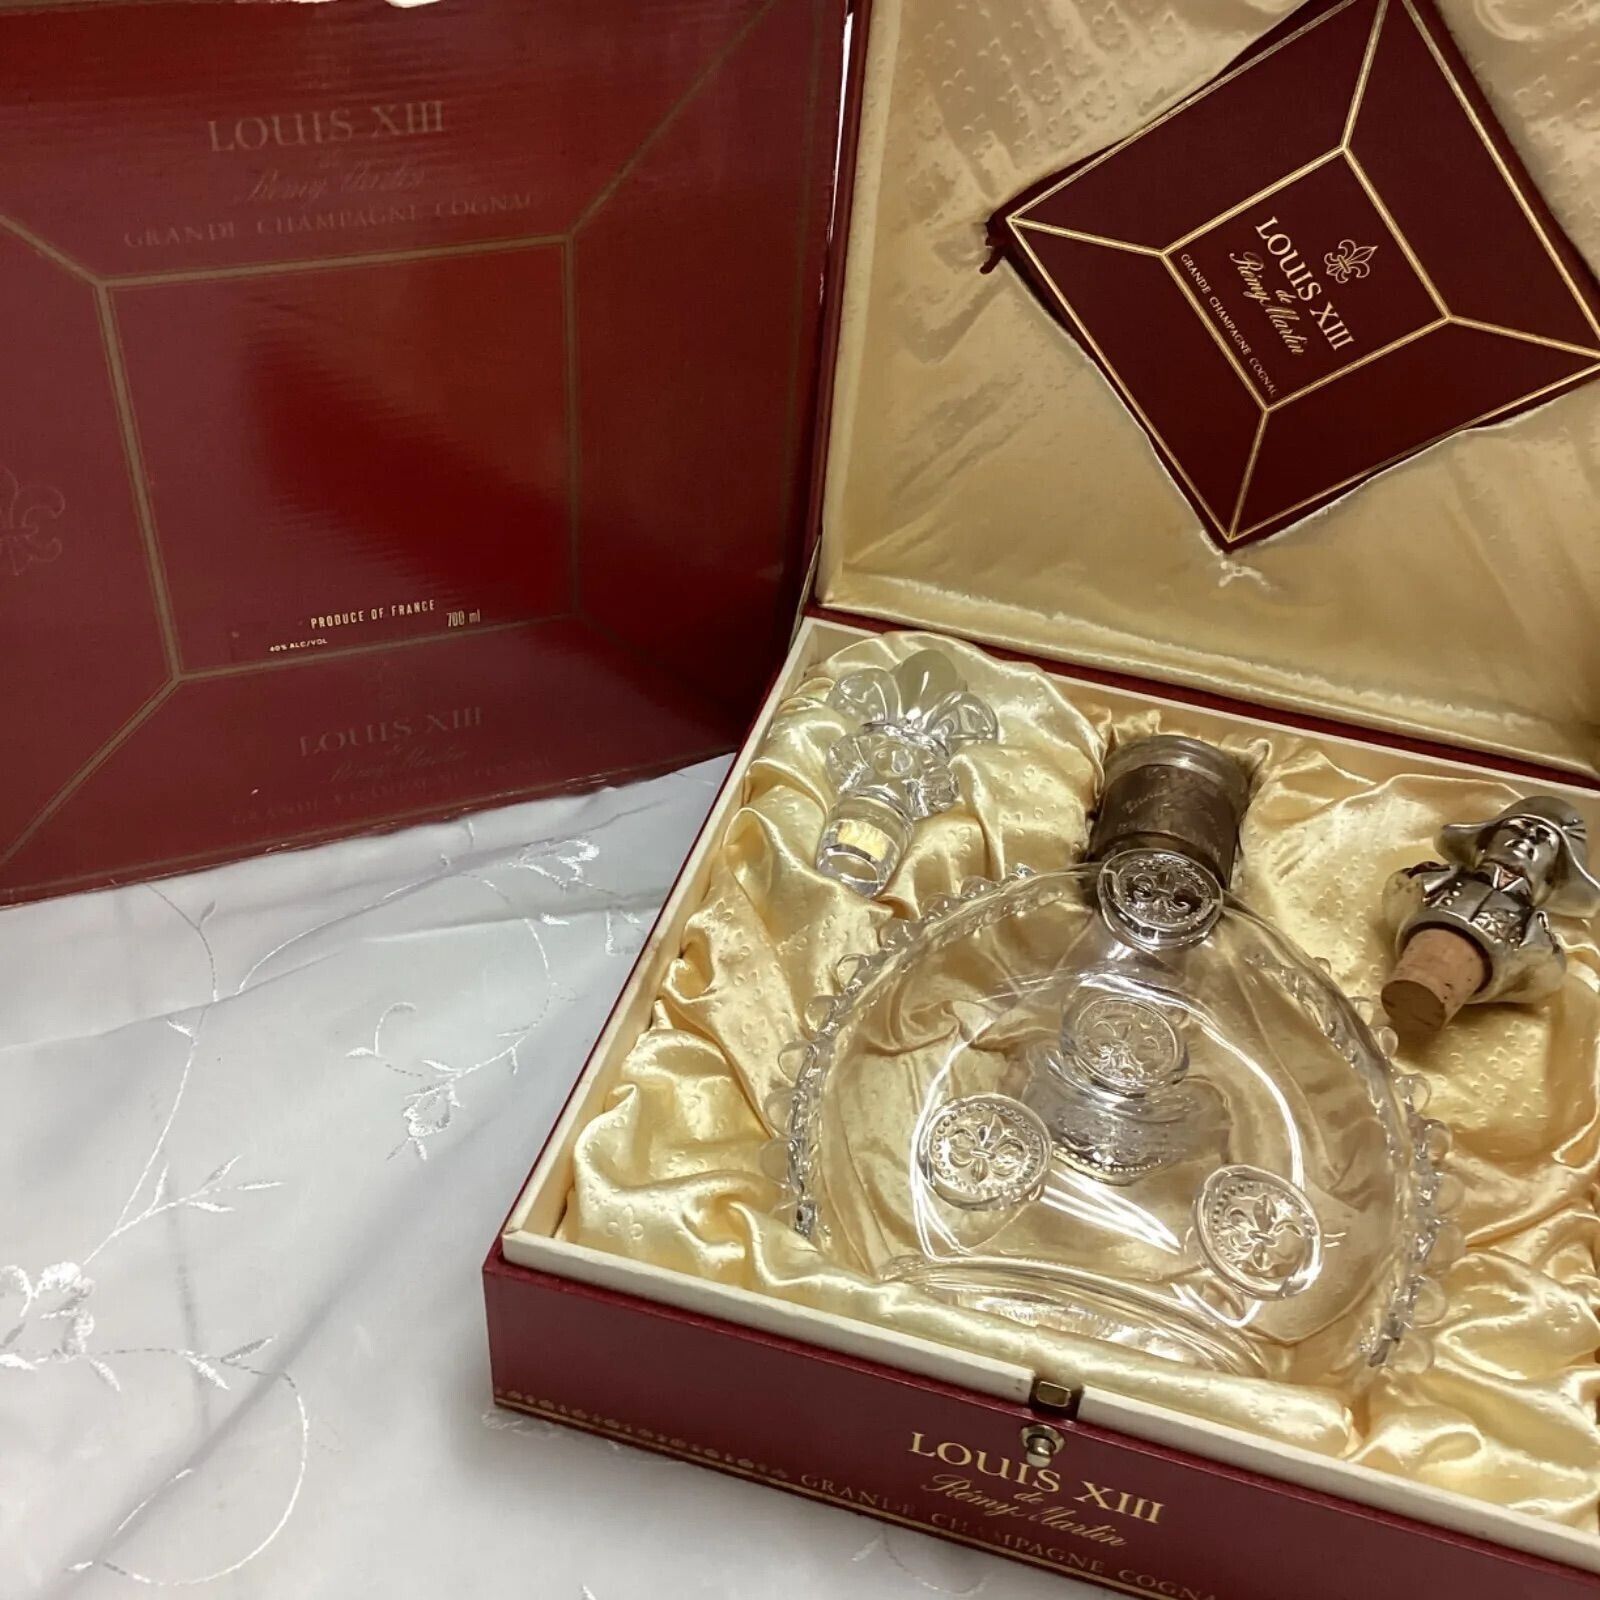 Louis XIII empty bottle cognac Remy Martin serial number special box included c